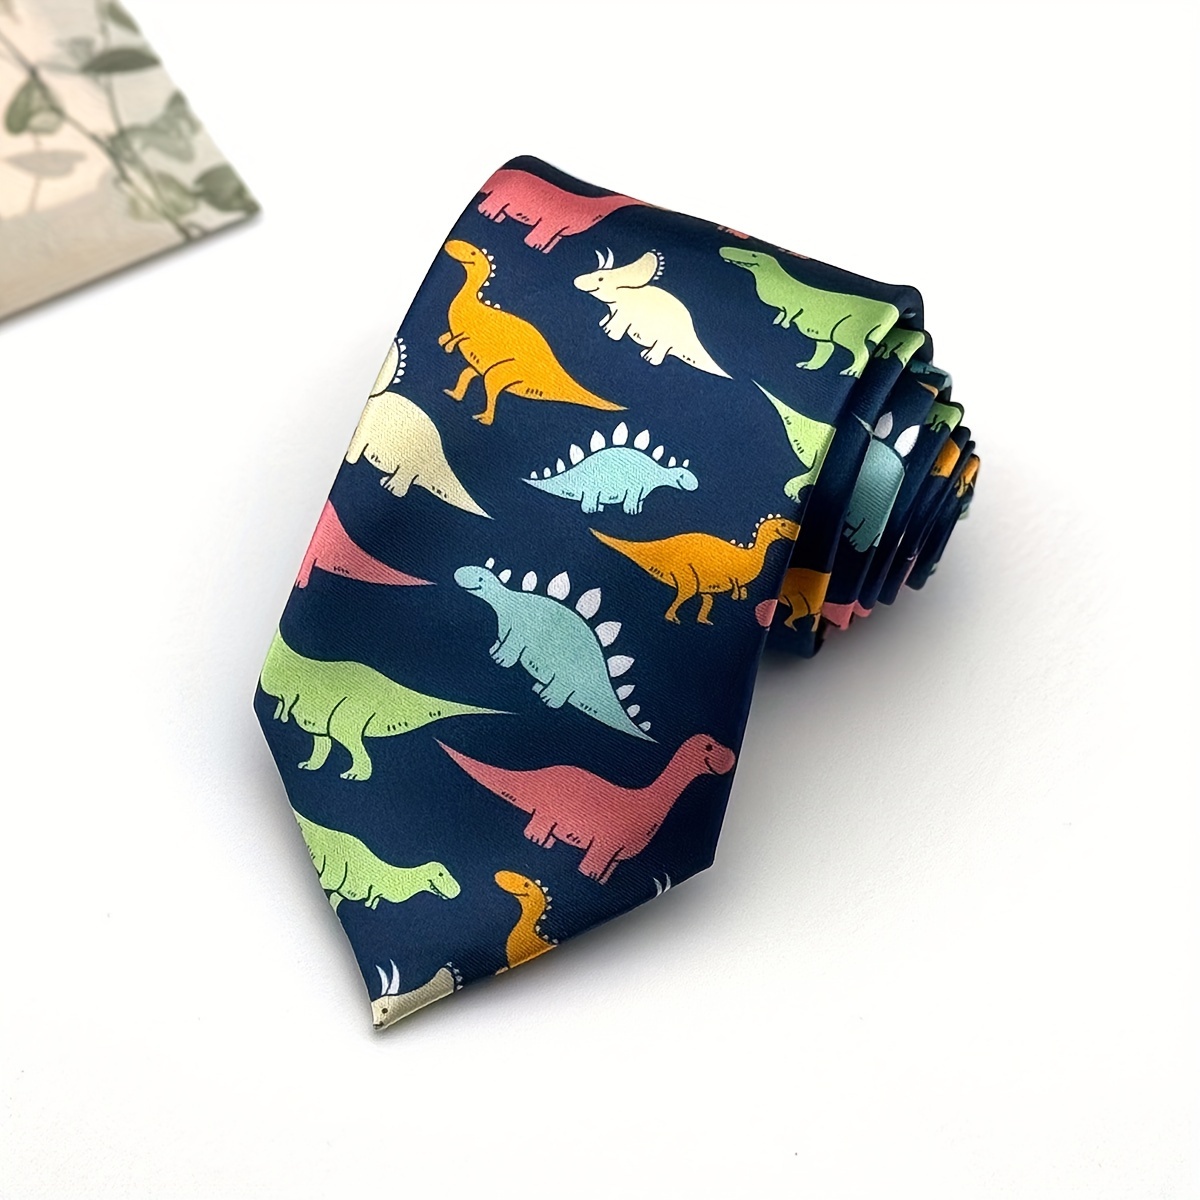 

Men's 8cm Dinosaur Print Polyester Fashion Formal Tie, Business White-collar Personalized Hand-tied Tie, Suit Accessory Tie